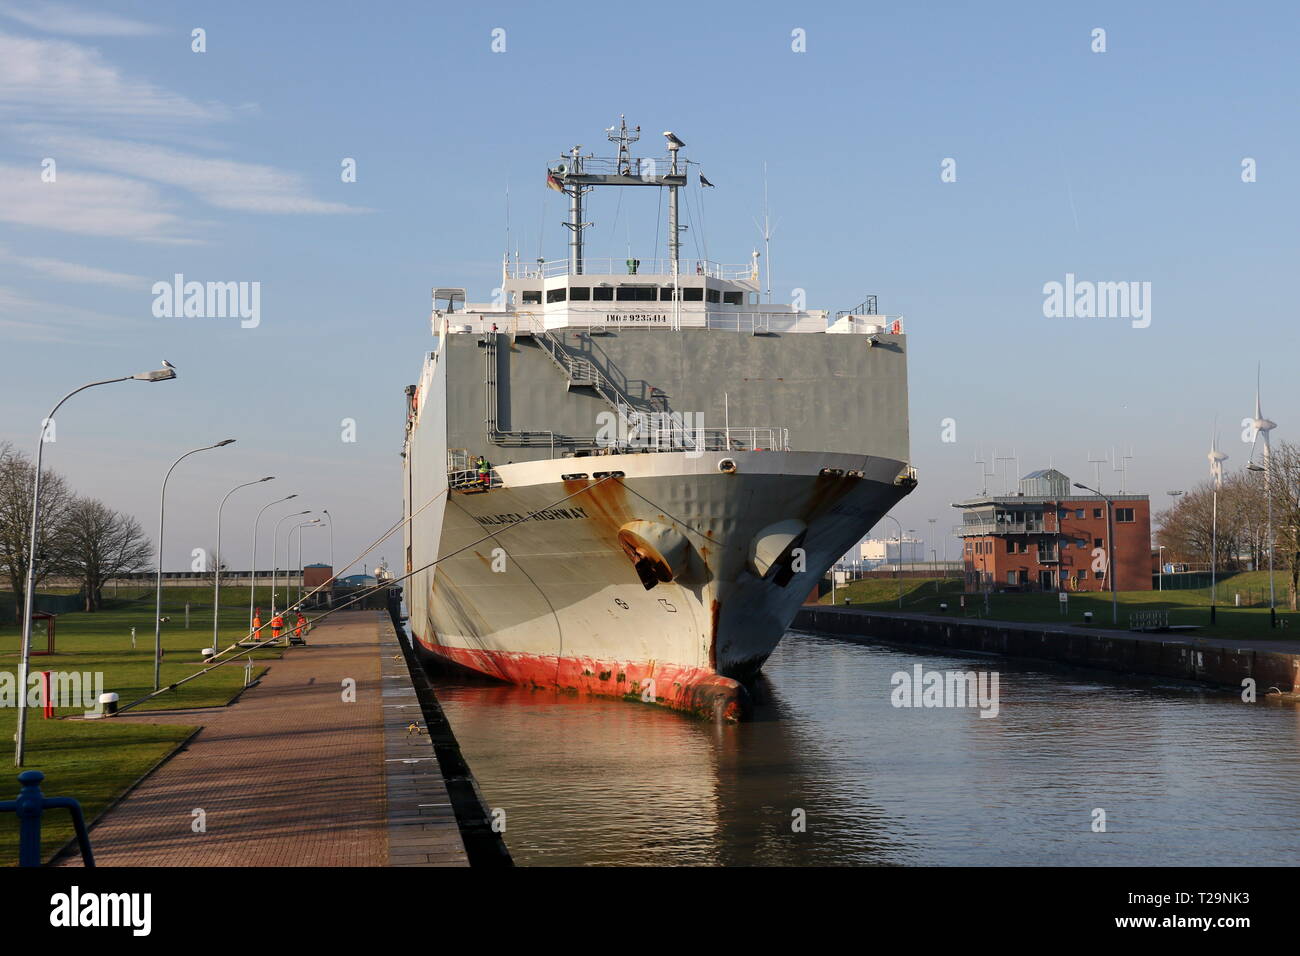 The car carrier Malacca Highway is on 17 February 2019 in the port lock of Emden. Stock Photo